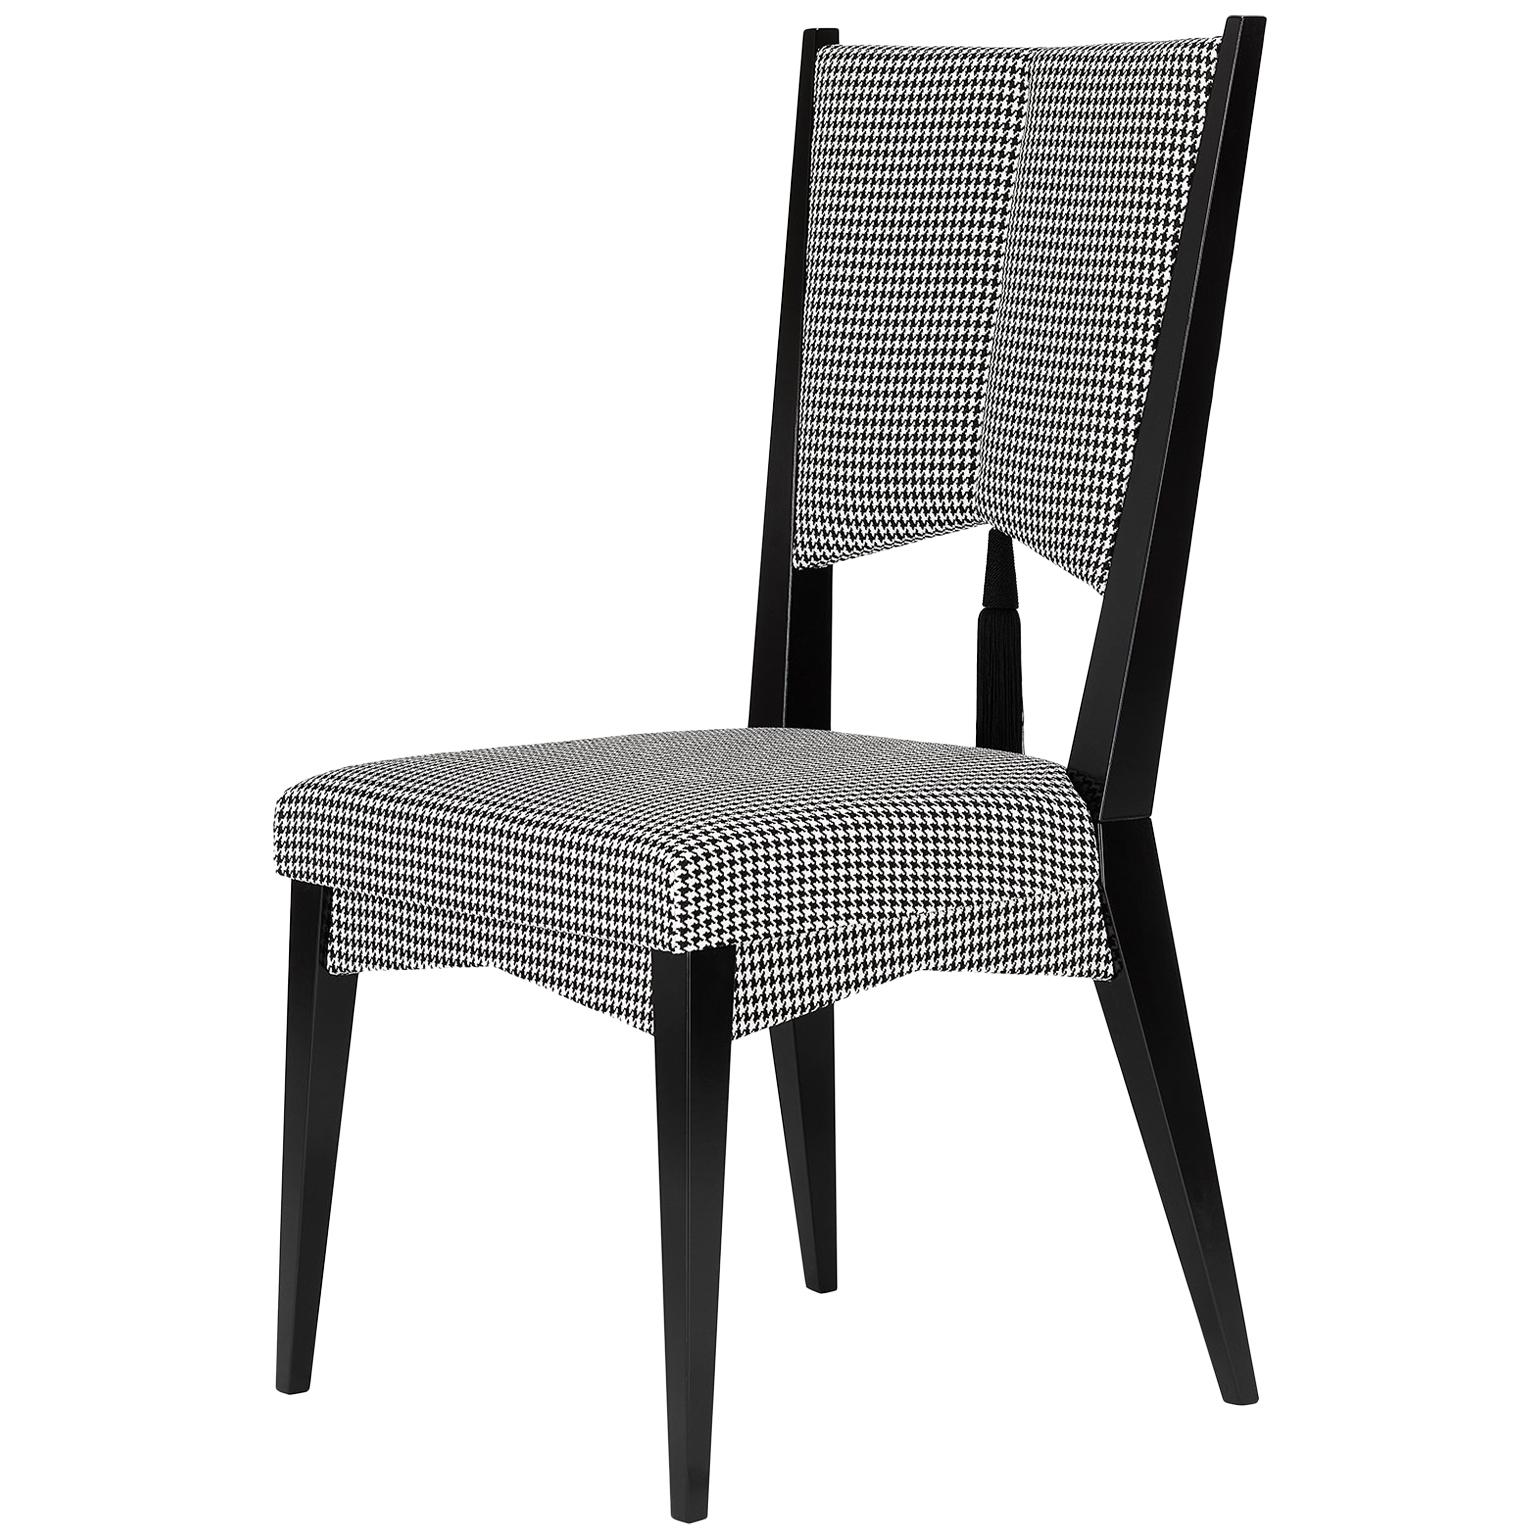 Black and white vintage fabric. An embroidered rose and a black tassel on the backrest give this chair its light feminine appeal. A minimalist structure, highlighted by a black design.
Solid beech structure with semi gloss black varnish. Except for